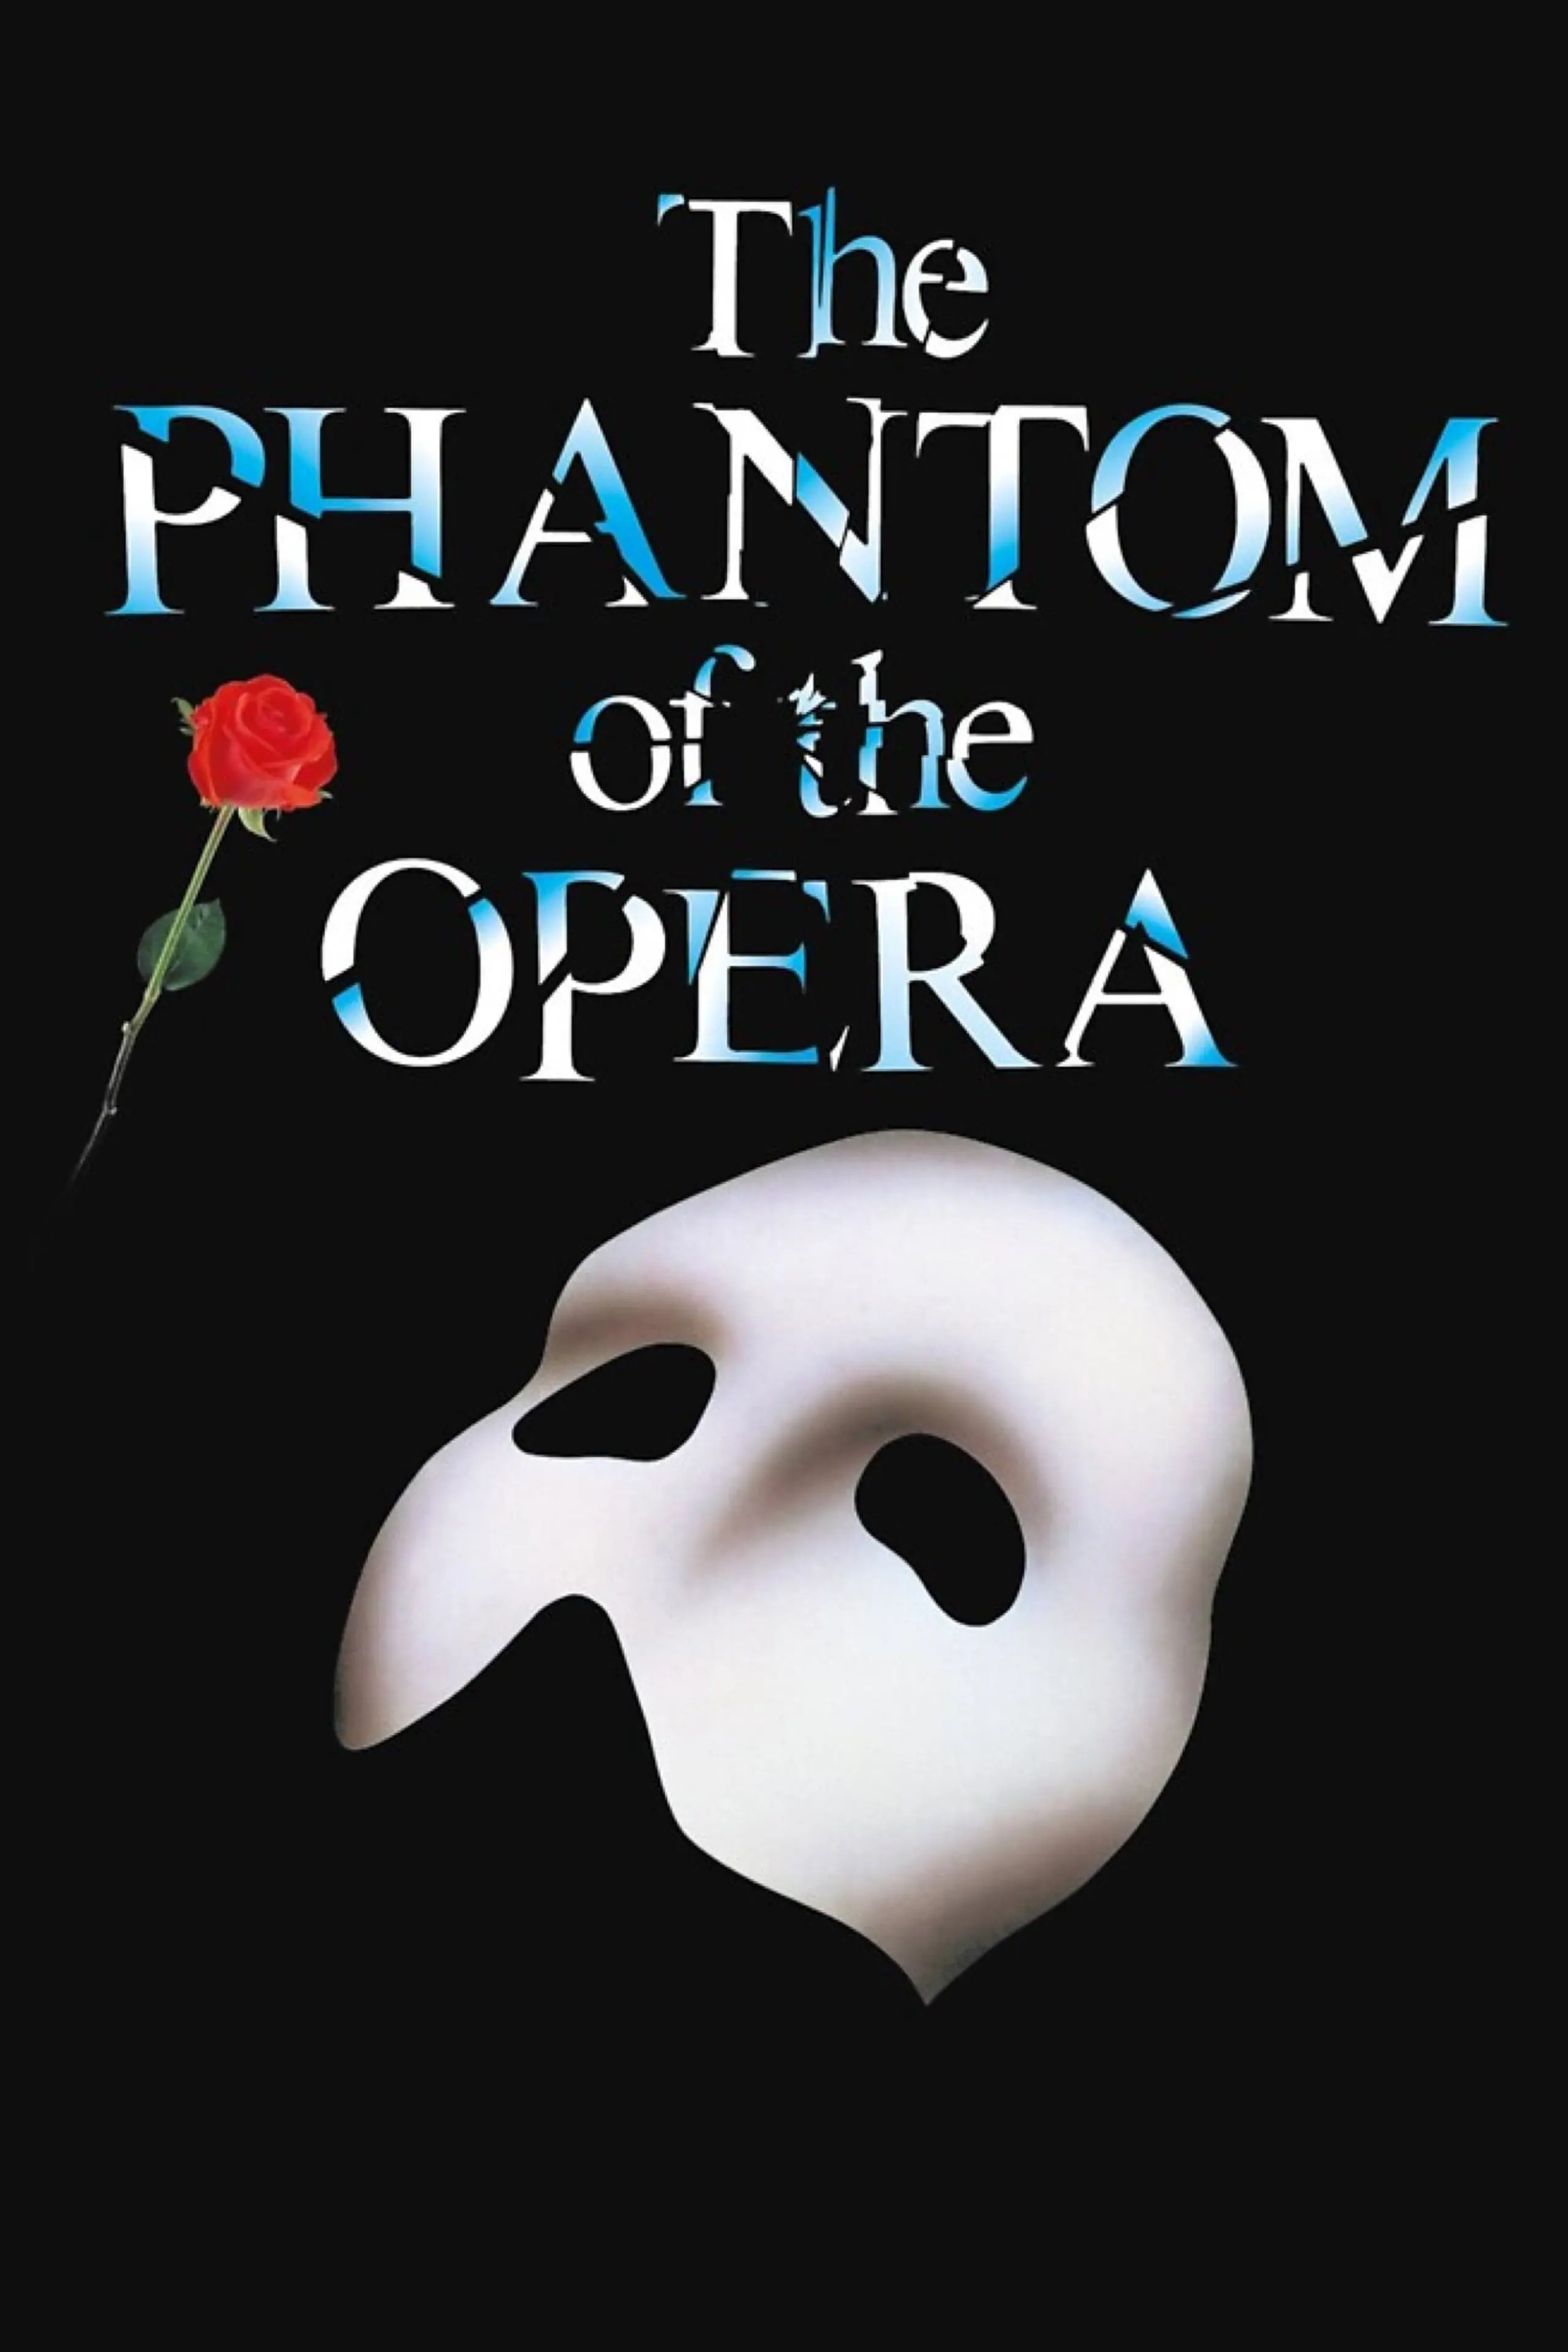 Behind the Mask: The Story of 'The Phantom of the Opera'